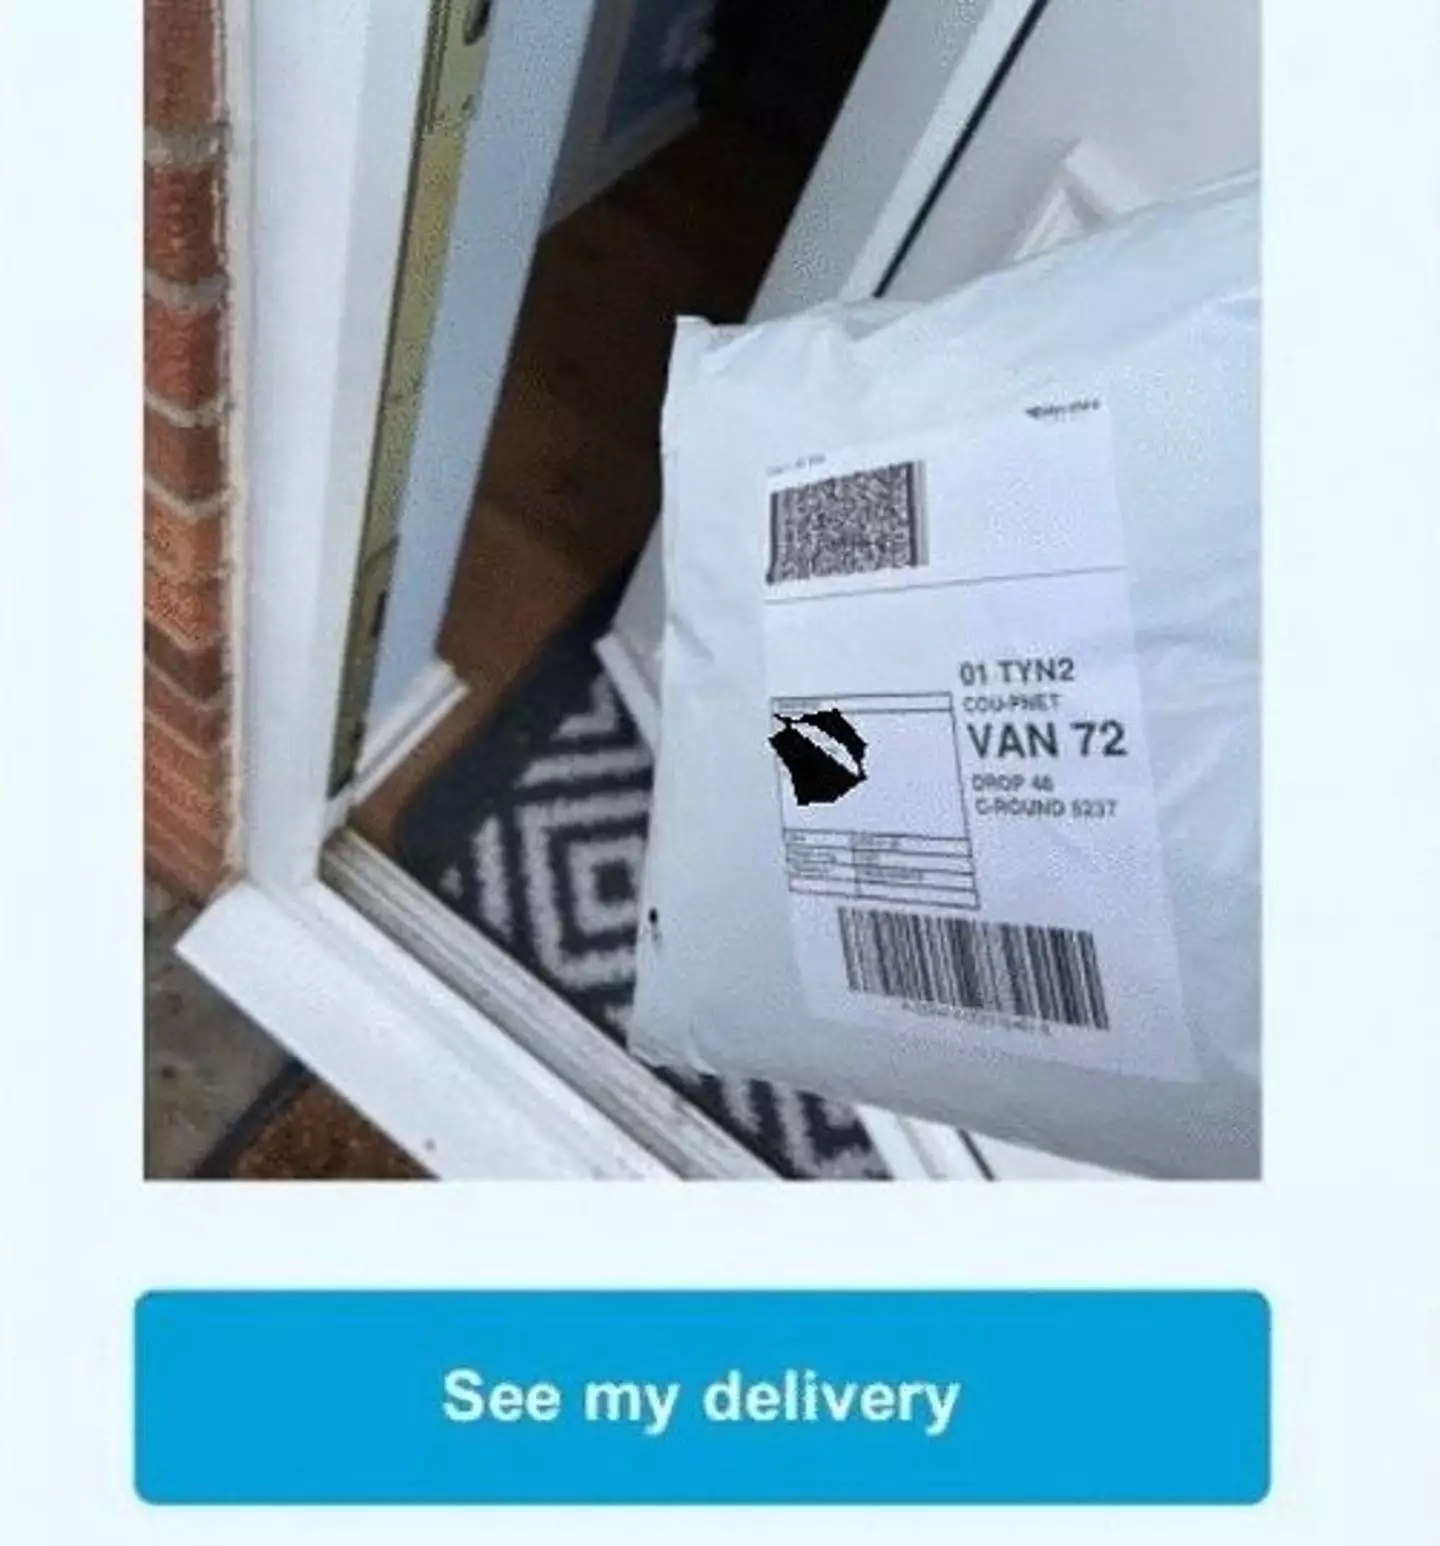 The proof of delivery the woman received.